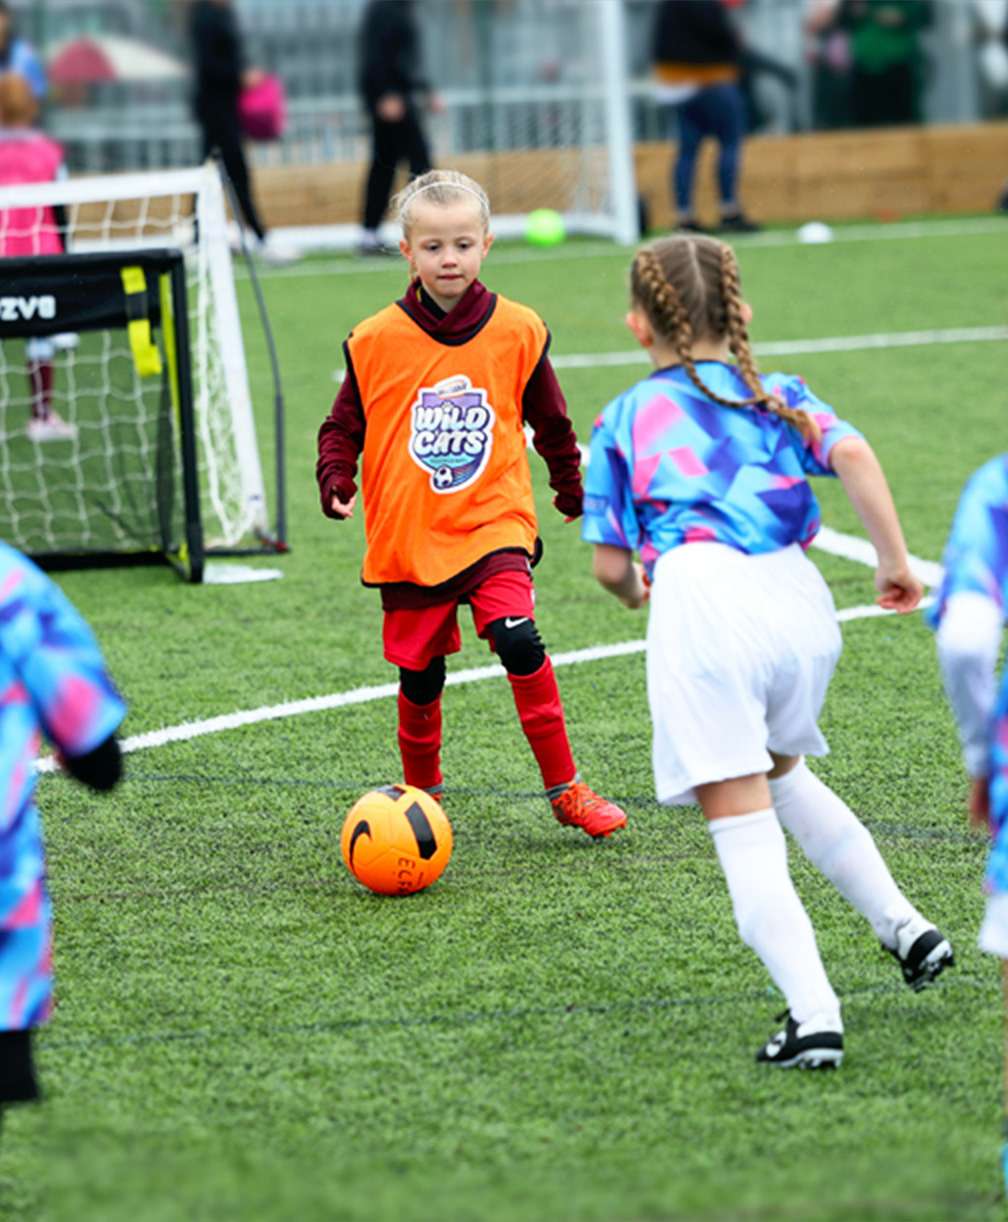 A young girl receives a pass during a small-sided game at a Wildcats training session.